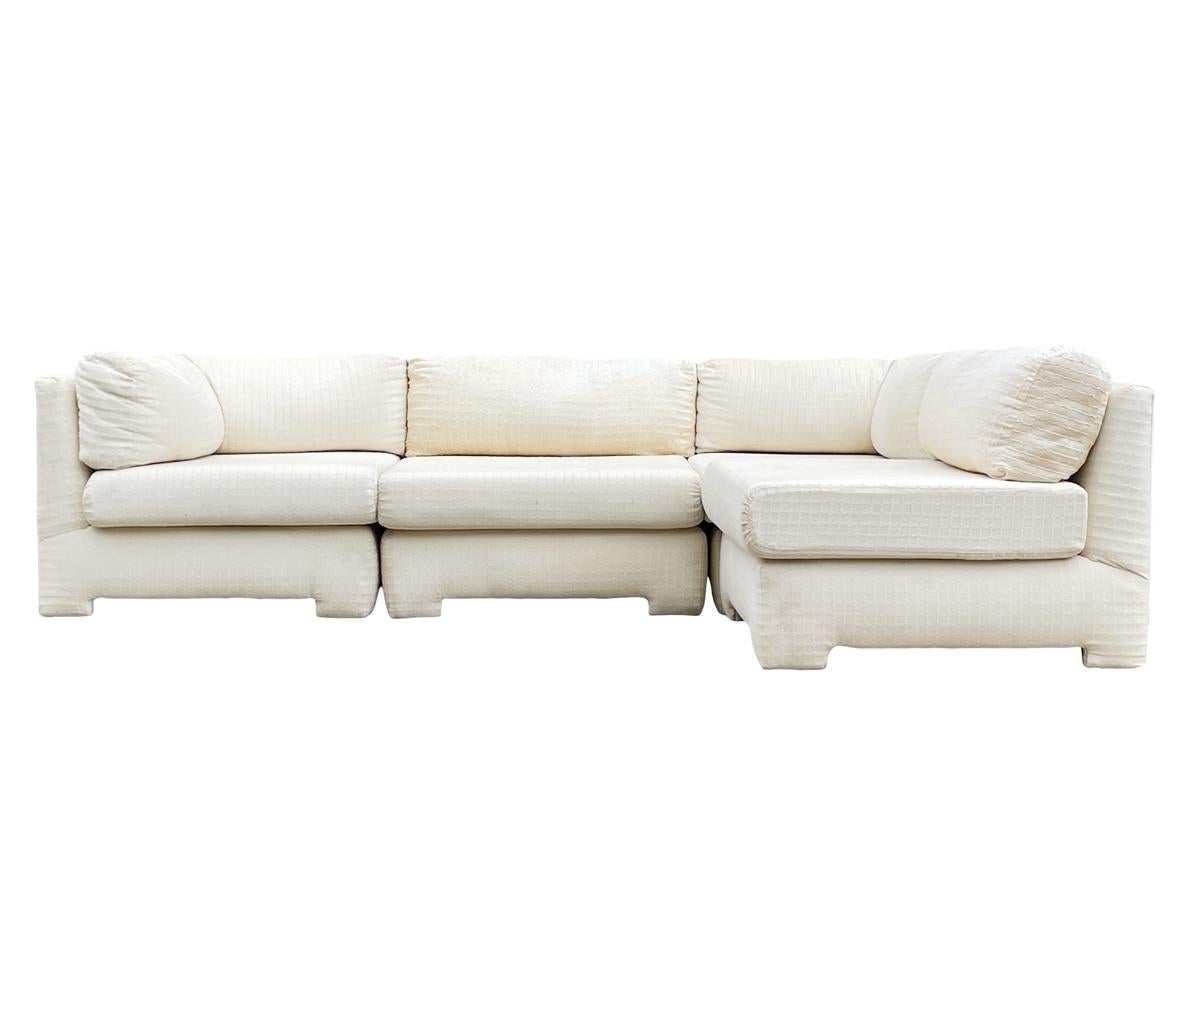 Late 20th Century Mid-Century Modern Sectional or Modular Parsons Sofa Set,  Left or Right Hand